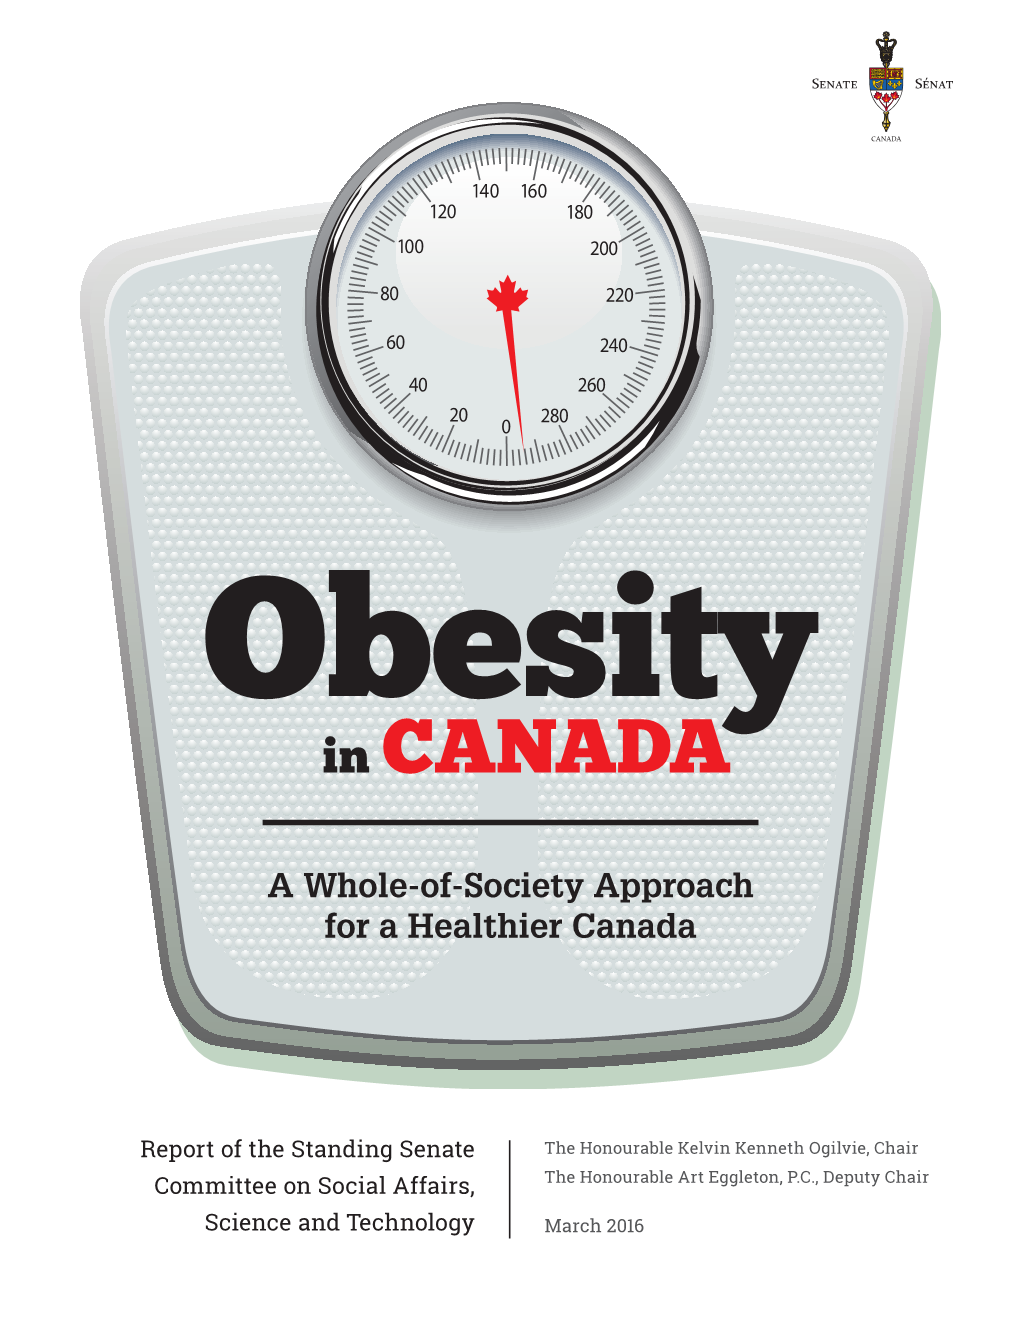 Senate Committee Report on Obesity in Canada